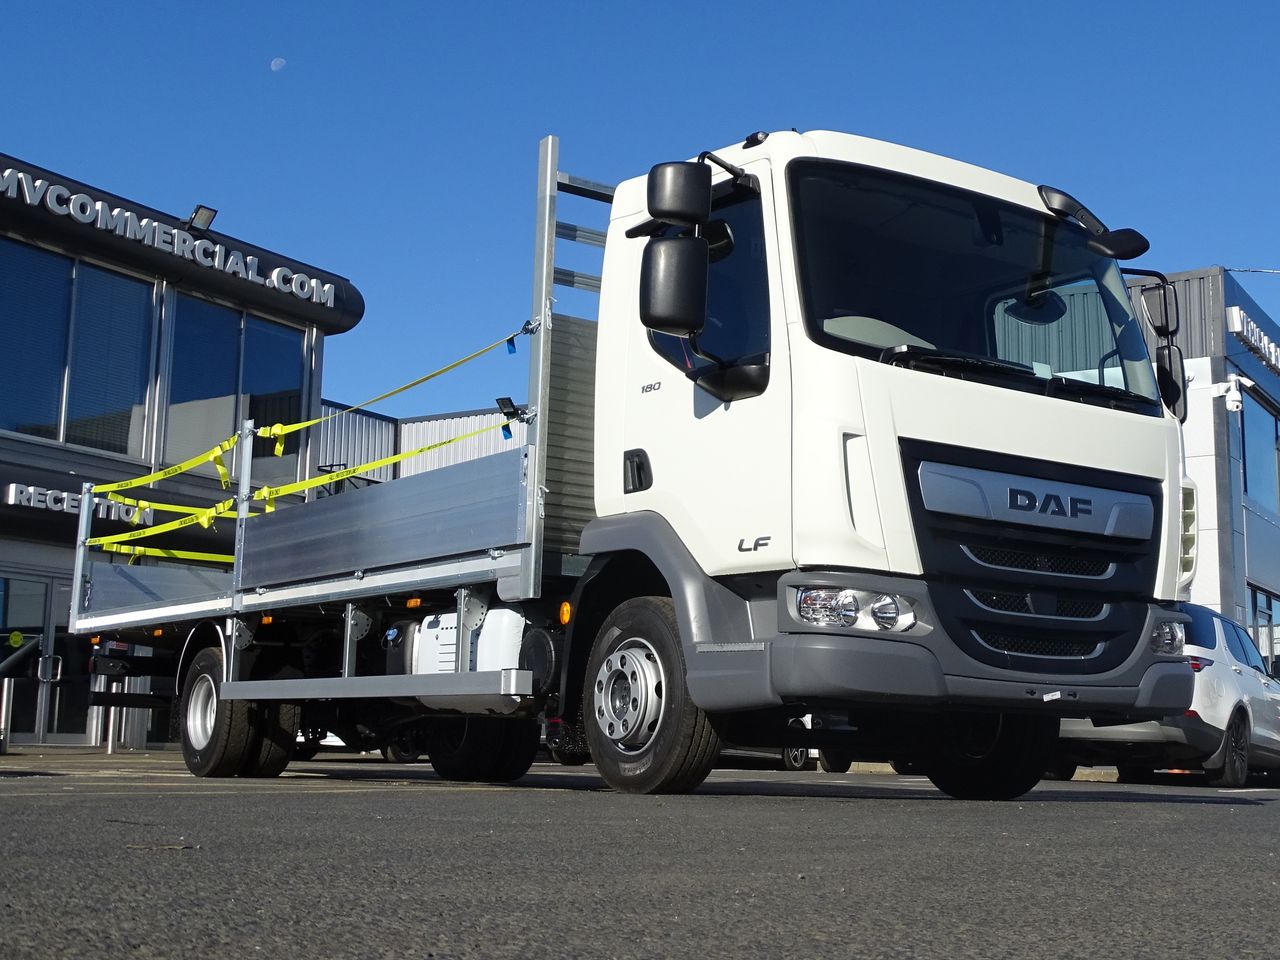 Ready to go DAF LF 180 FA, Scaffolding, 180, 10 Tonne, Day Cab, Automatic, 3 Seats in Cab, Air Conditioning, Fall Arrest System, Full Height Headboard, Height Indicator, , -, - | for sale at MV Commercial, the UKs leading Truck, Trailers and Van supplier. (SN23YSY 90576)